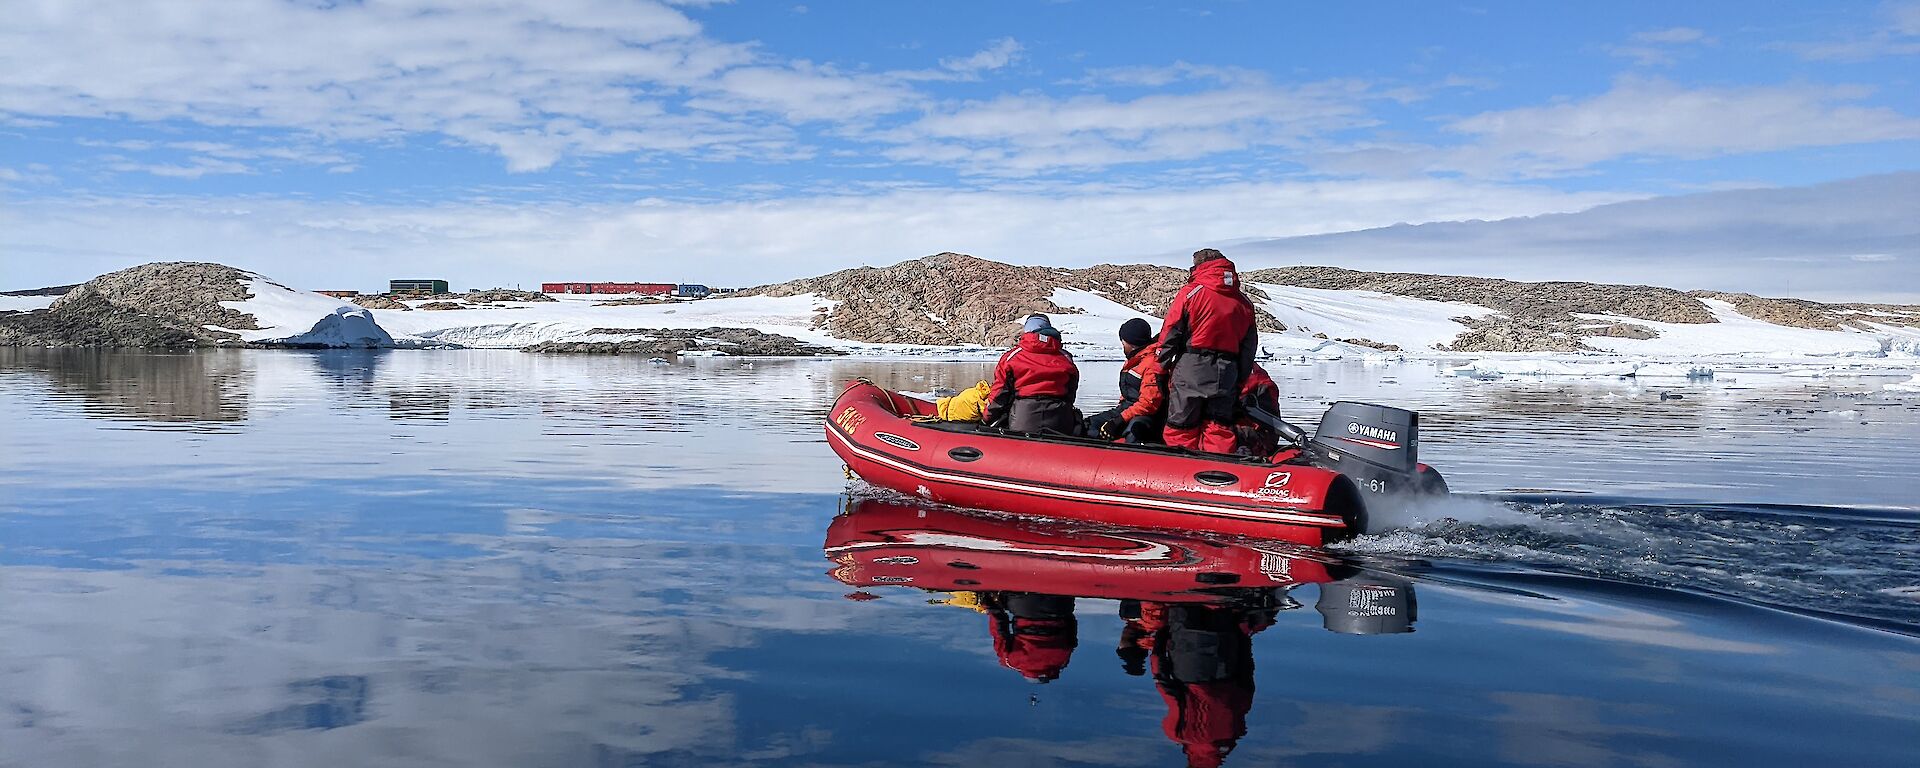 Inflatable boat with expeditioners. Still water conditions. Station in the background.